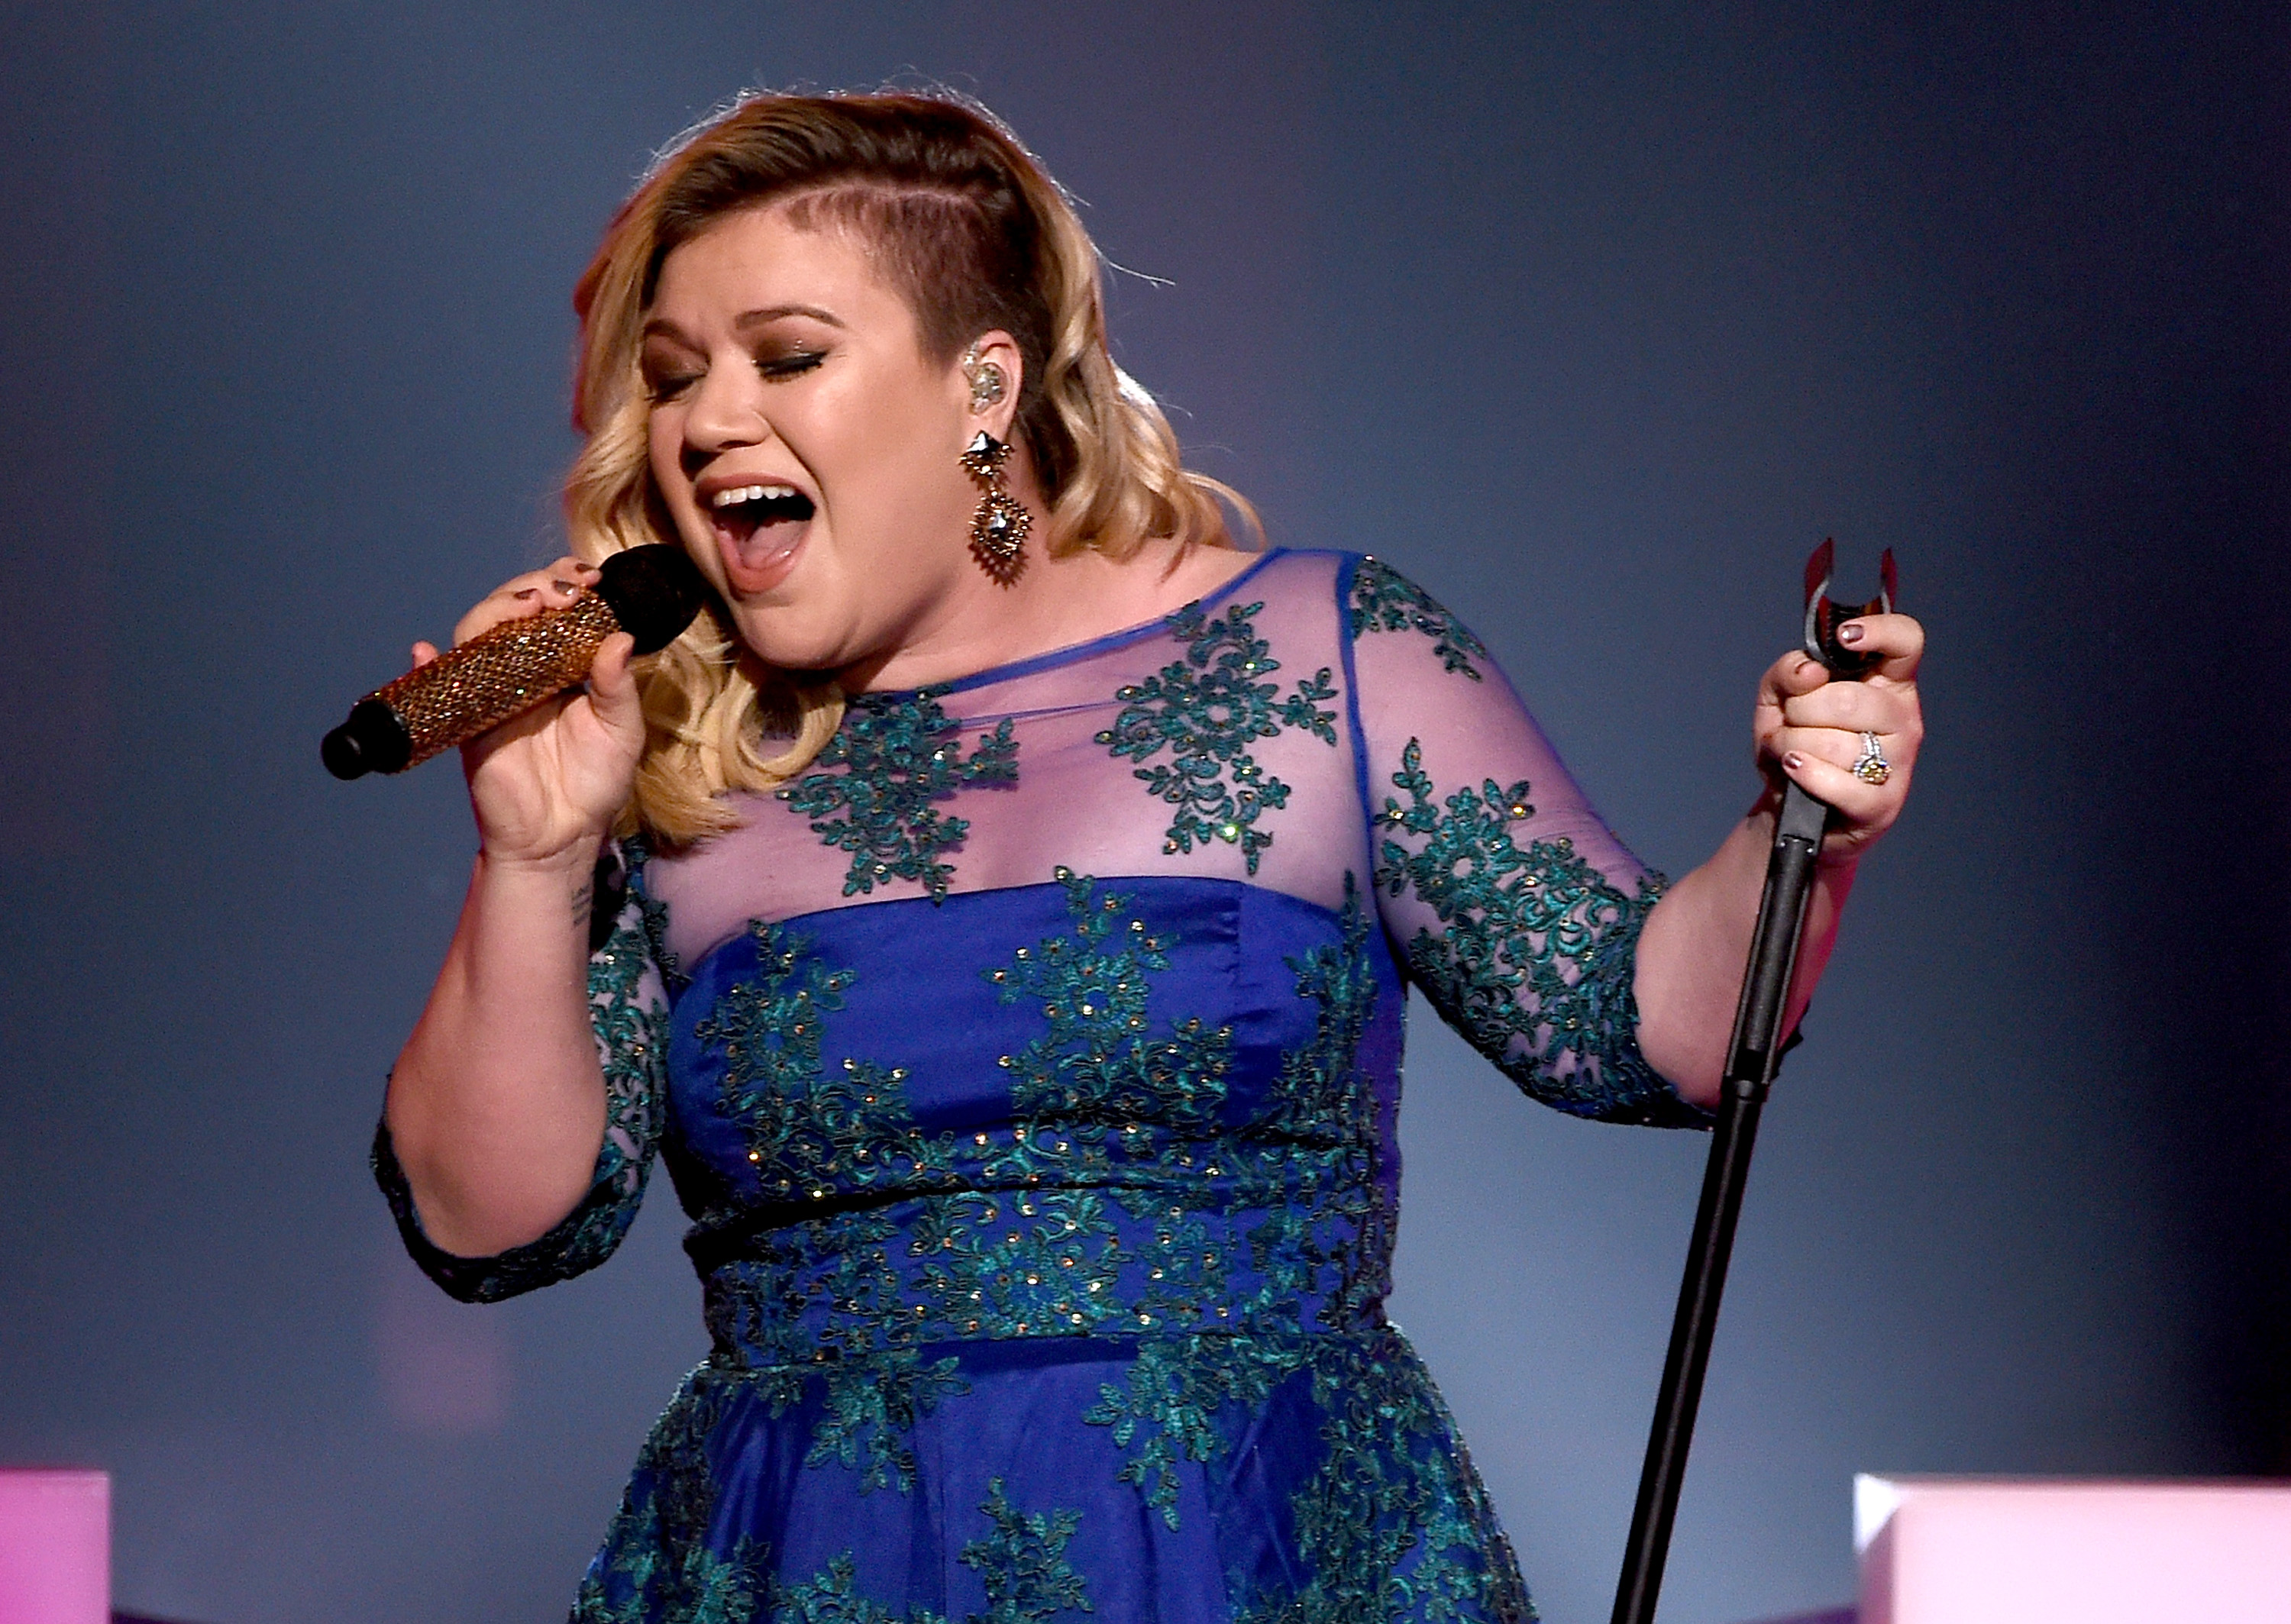 There’s One Song Kelly Clarkson Won’t Sing During “Kellyoke”